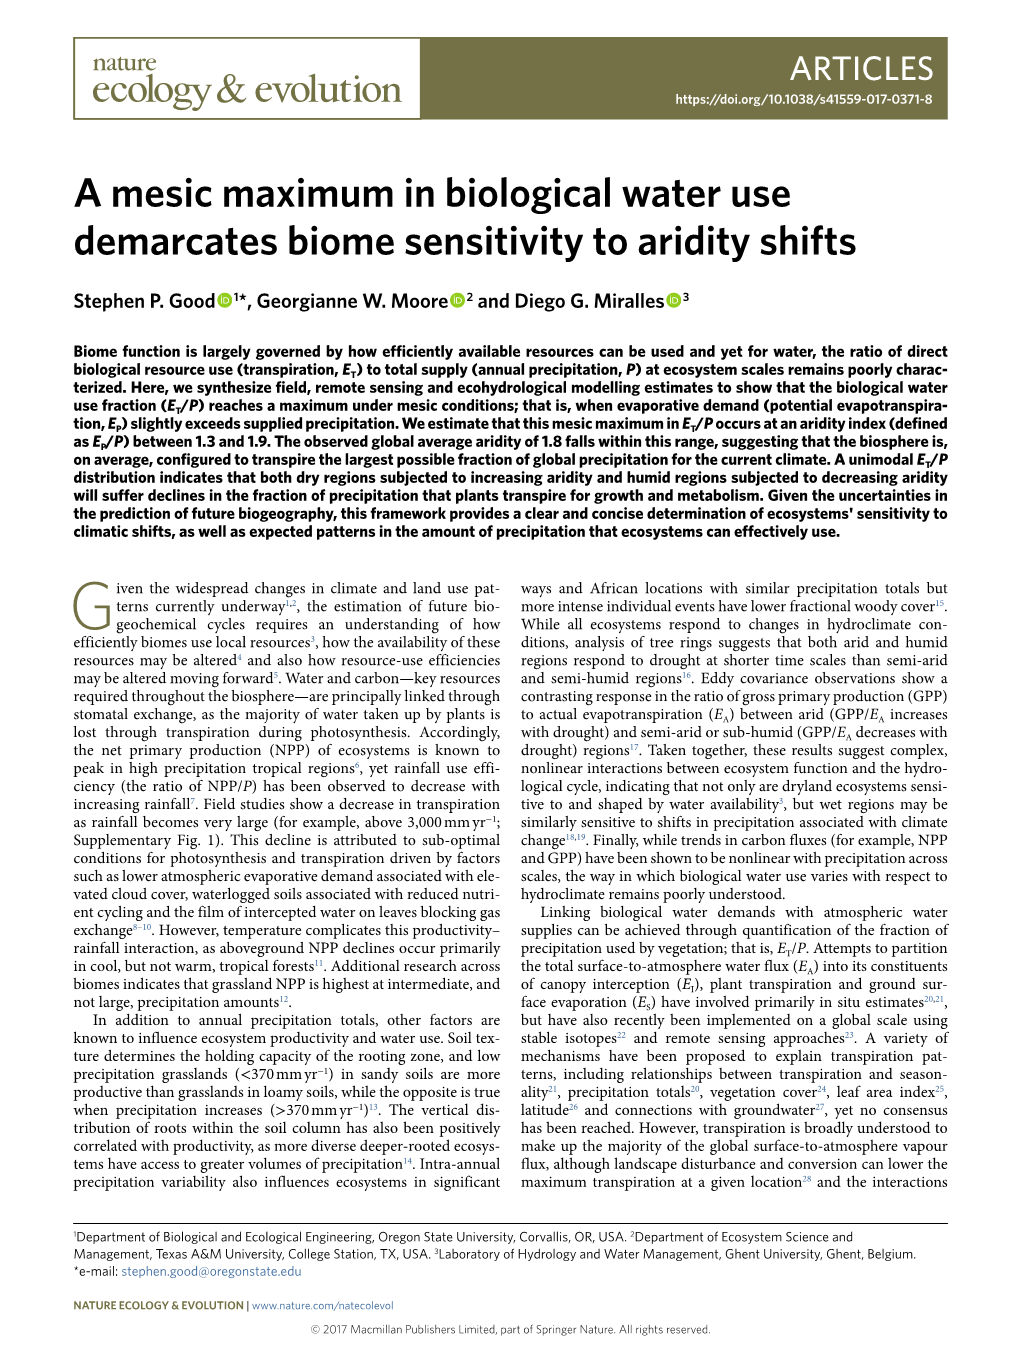 A Mesic Maximum in Biological Water Use Demarcates Biome Sensitivity to Aridity Shifts